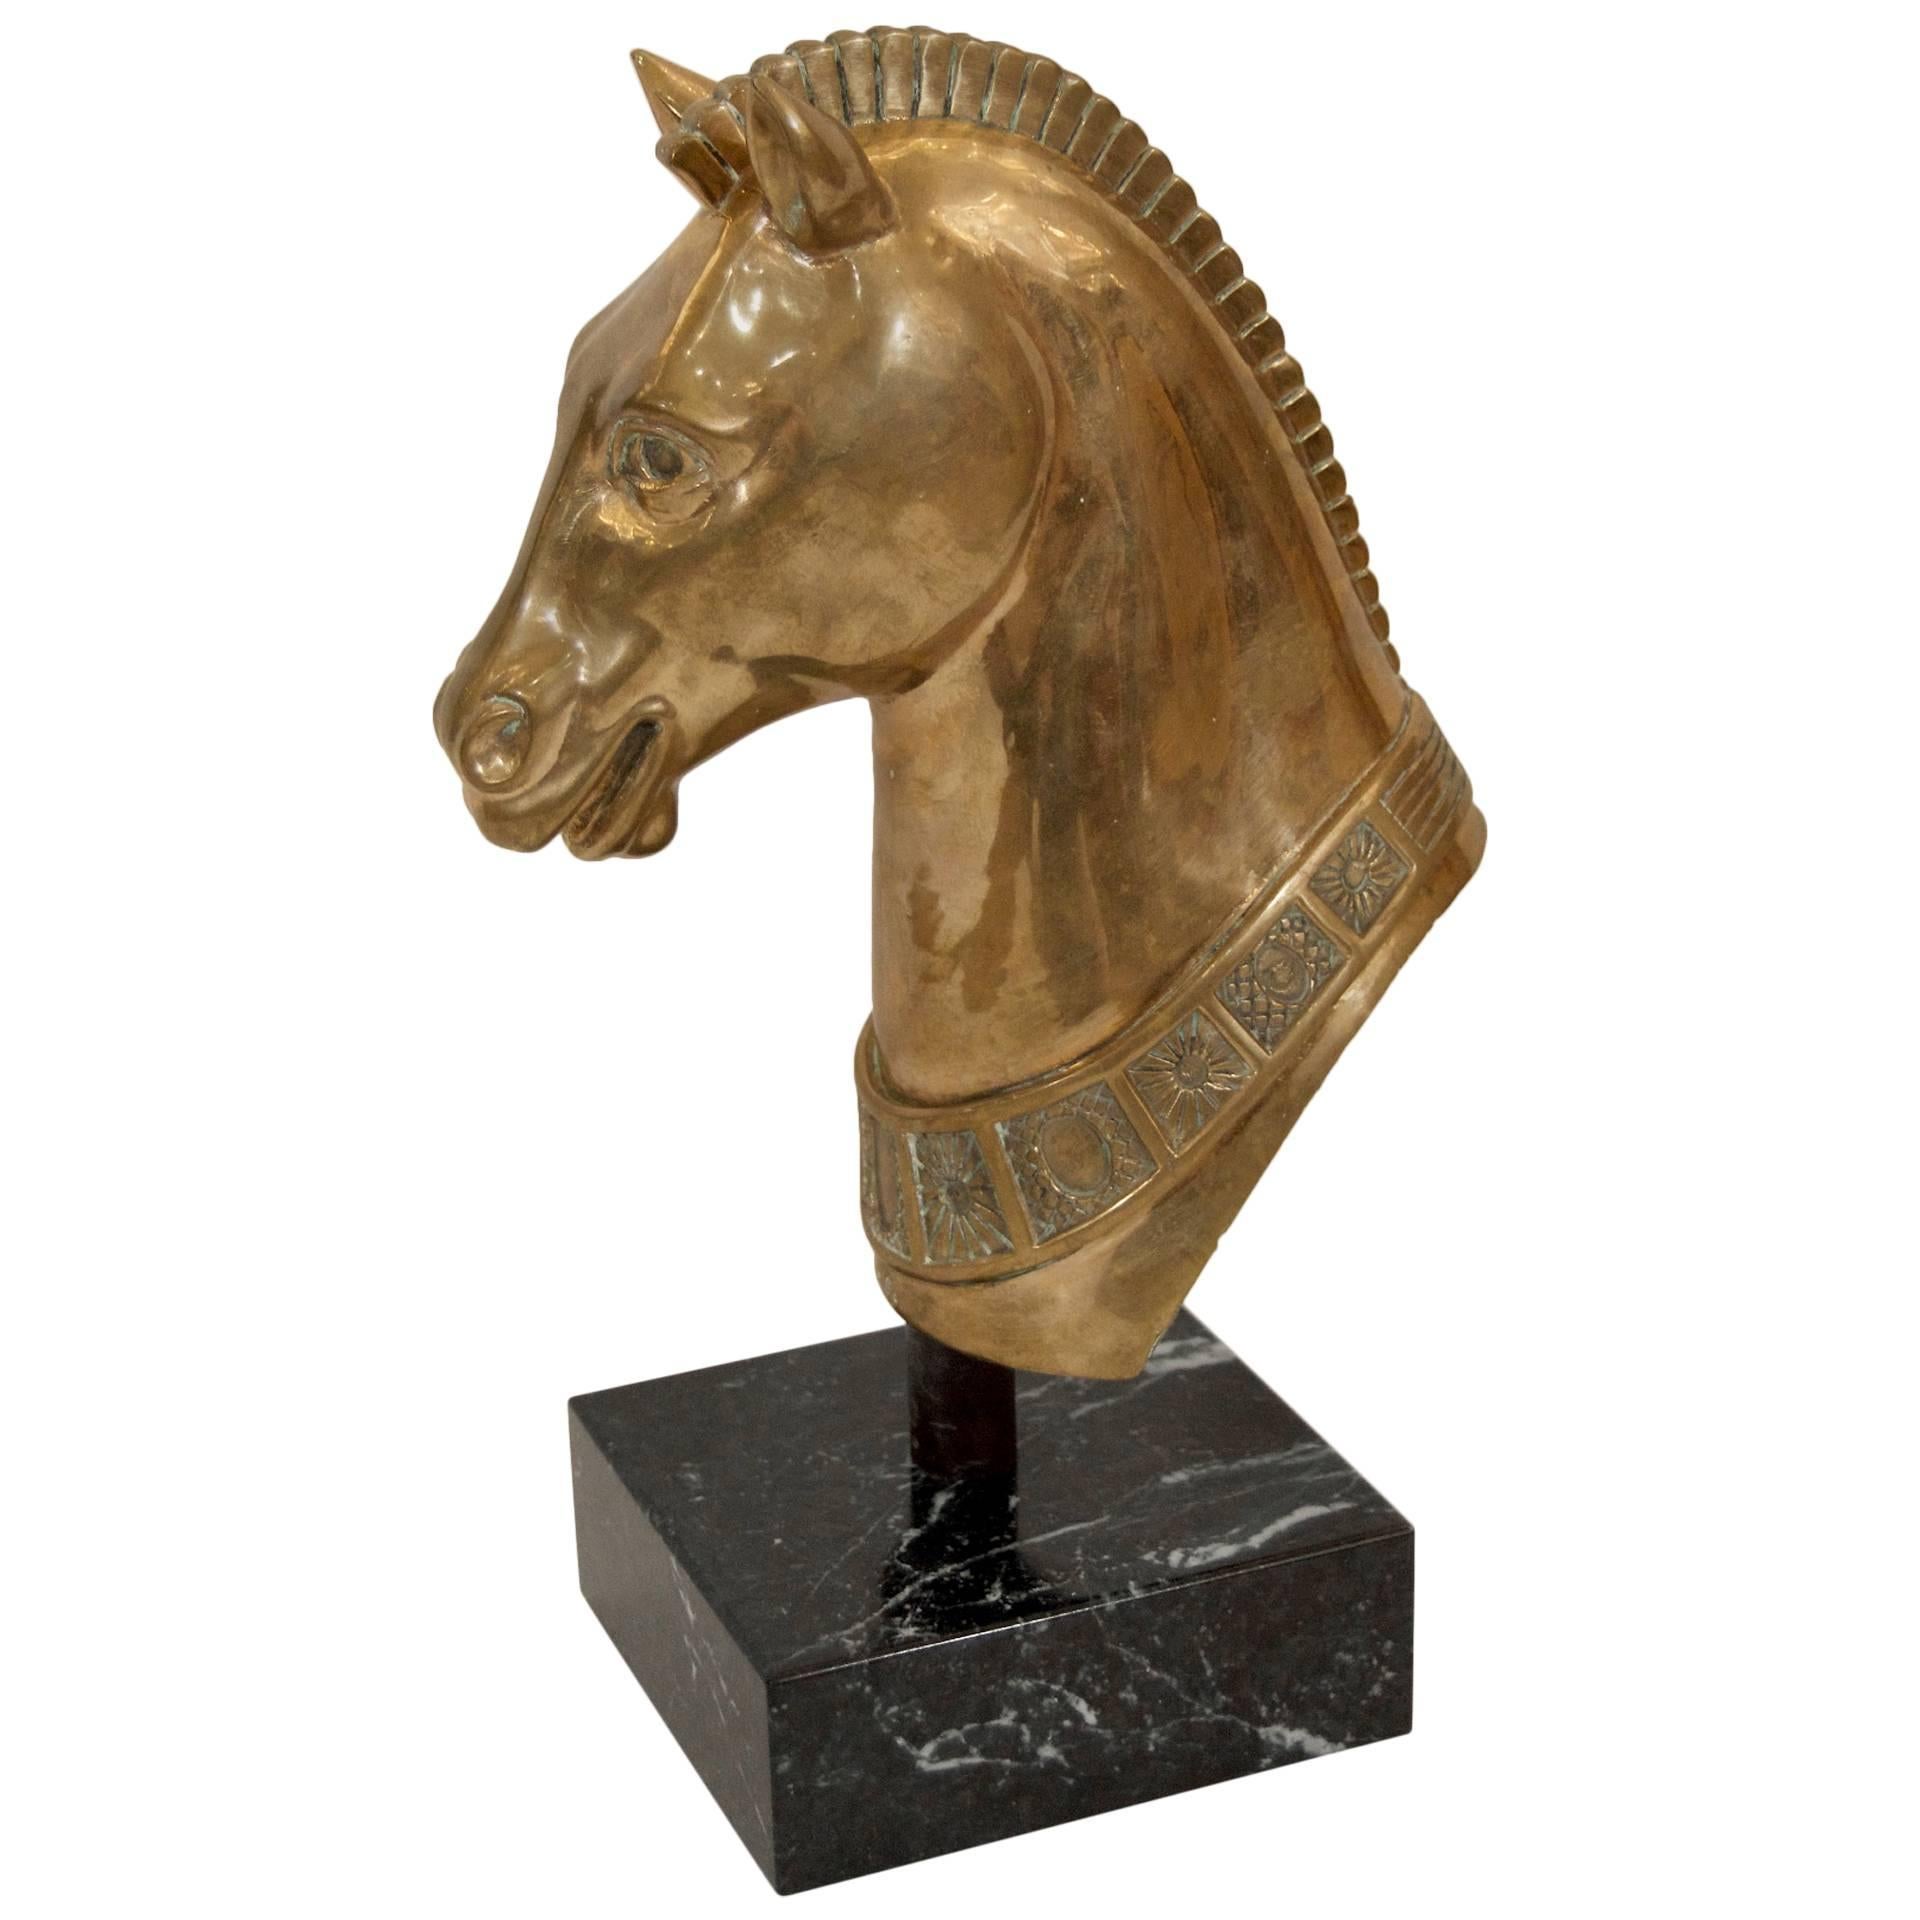 Well detailed solid brass sculpture of a horse head on a marble base.

